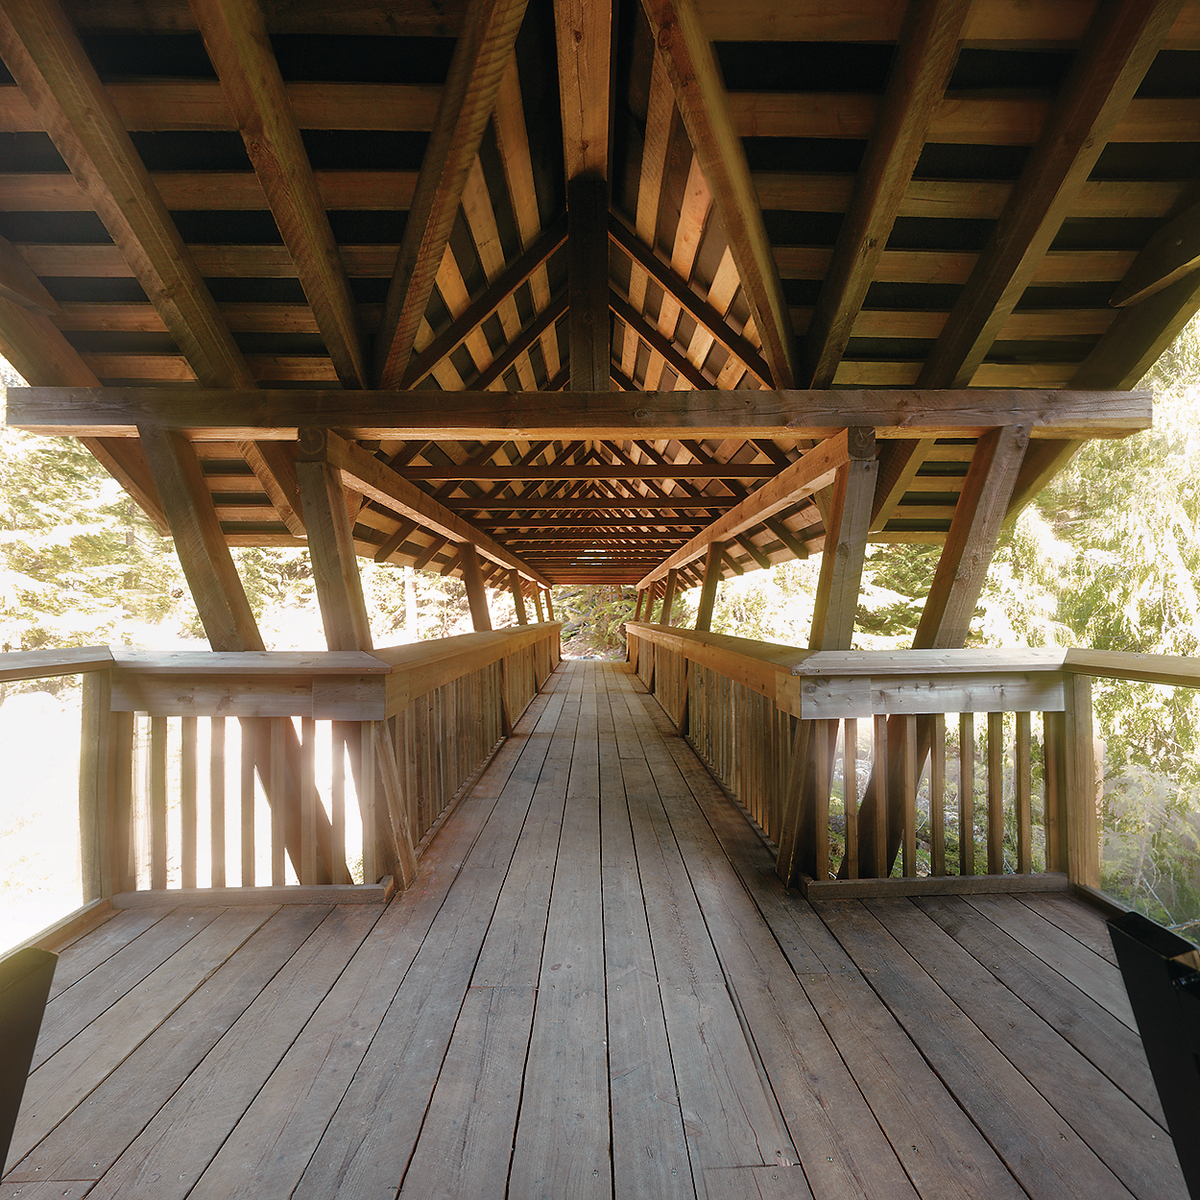 Daytime mid span view of Kuskanax River Footbridge showing wooden bannisters, railings, and roof structure constructed of glue-laminated timber (Glulam), Lumber, and solid-sawn heavy timber